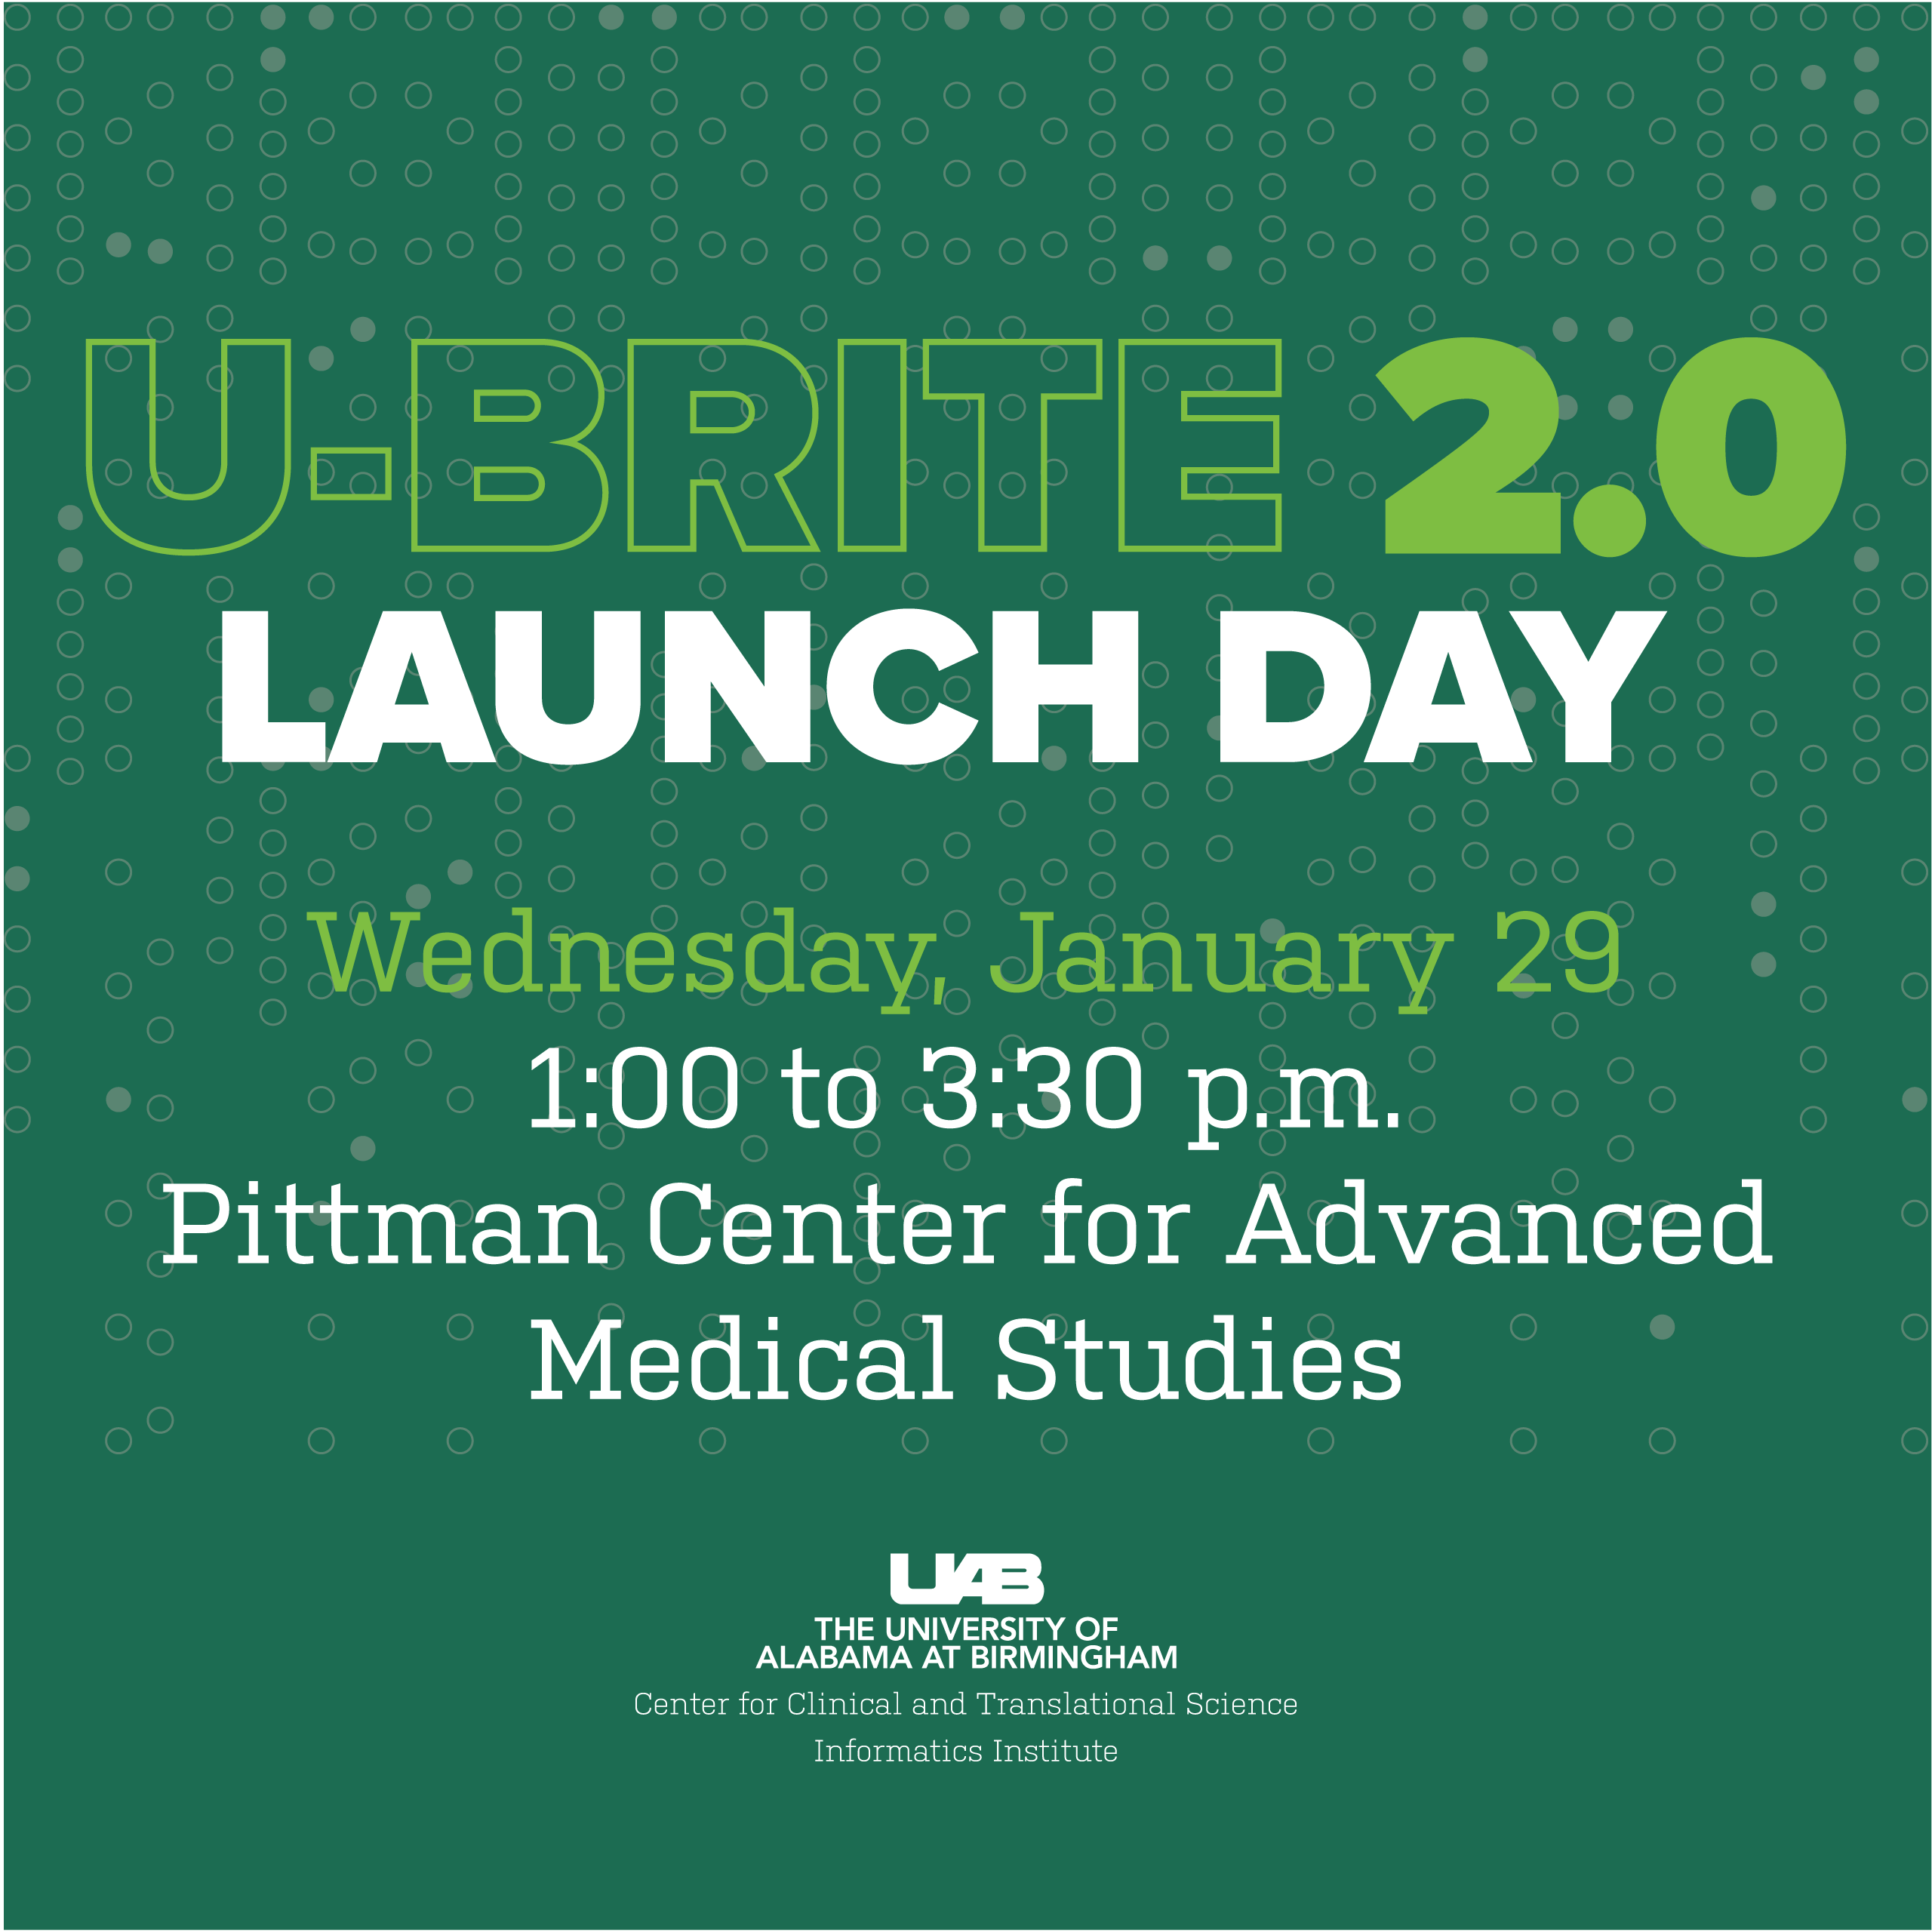 Calling All Research Teams: U-BRITE 2.0 Launch Day is January 29th!